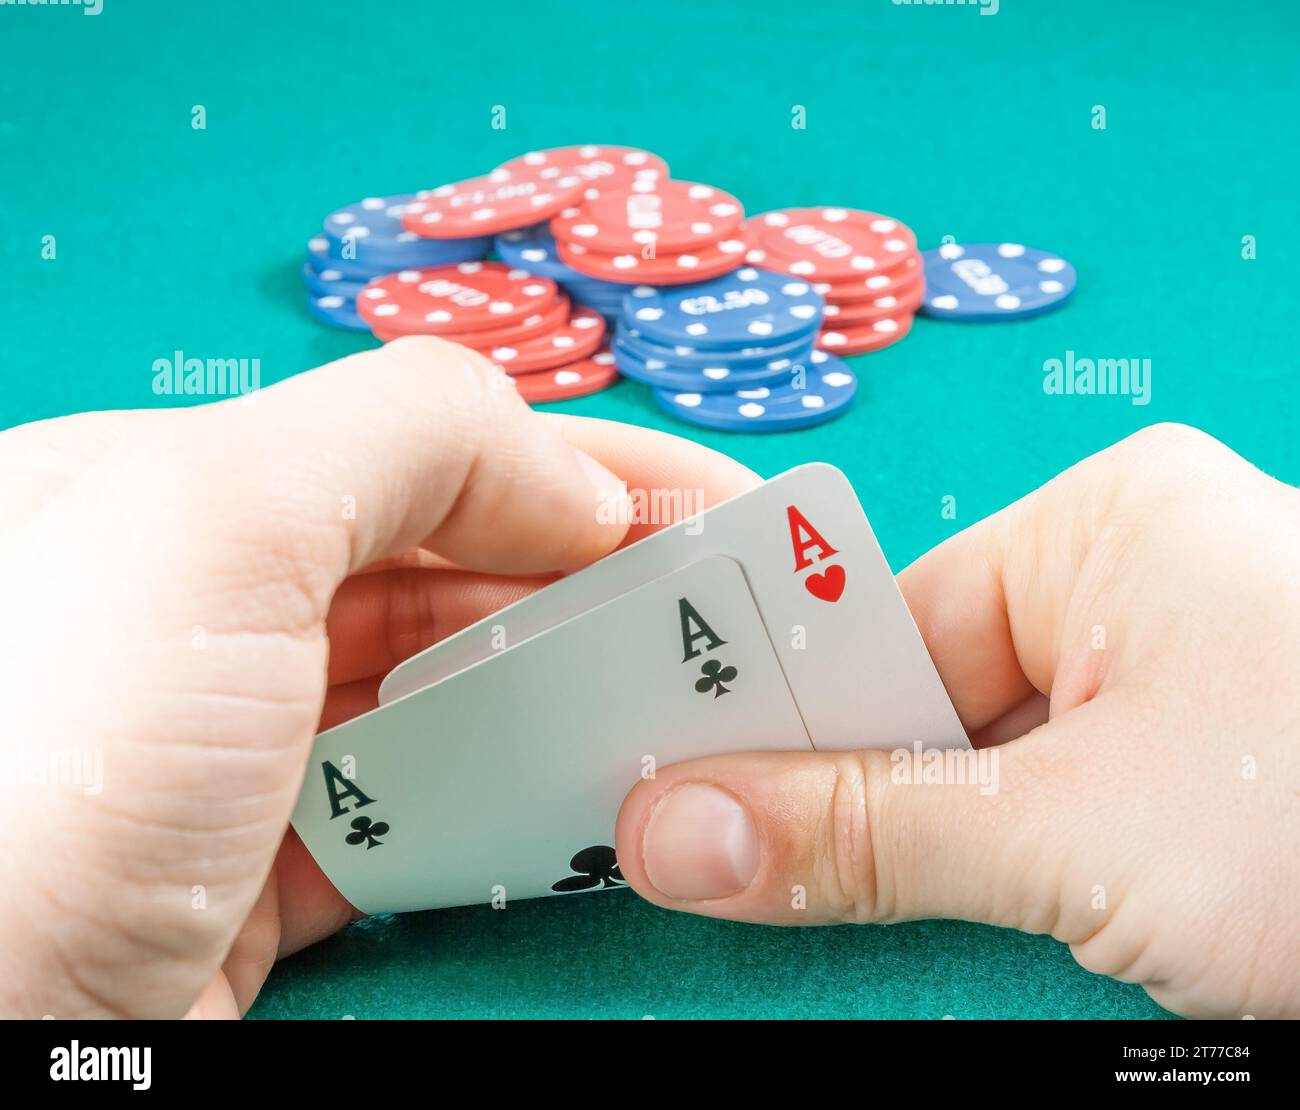 winning playing cards in a man hands near fiches on gaming table Stock Photo